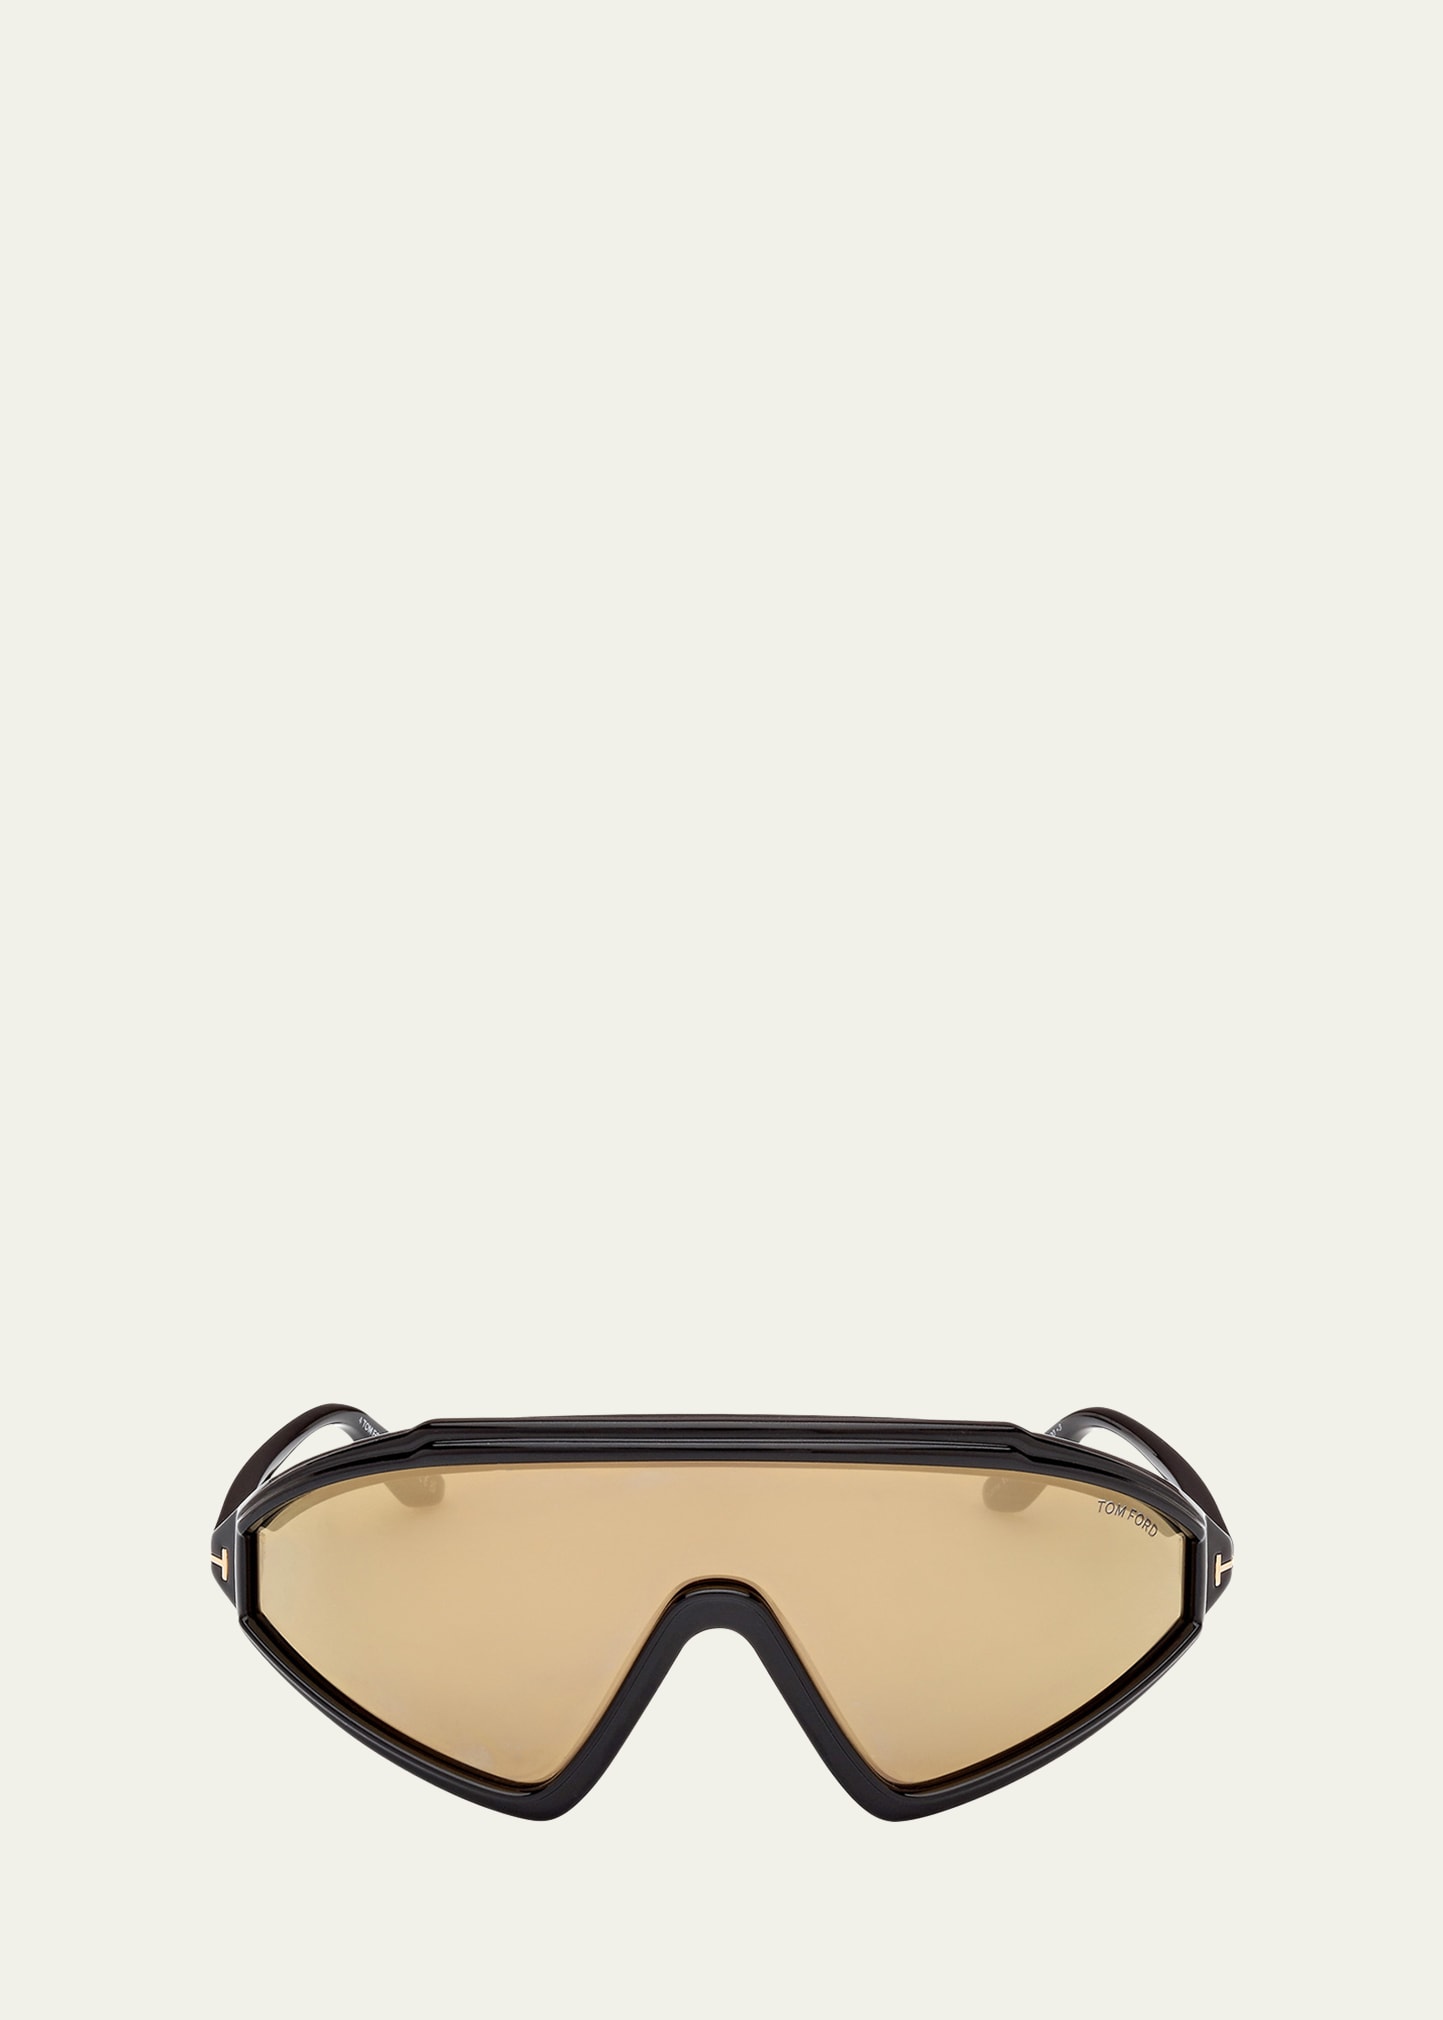 Tom Ford Shield Injected Sunglasses In Black/brown Mirrored Solid